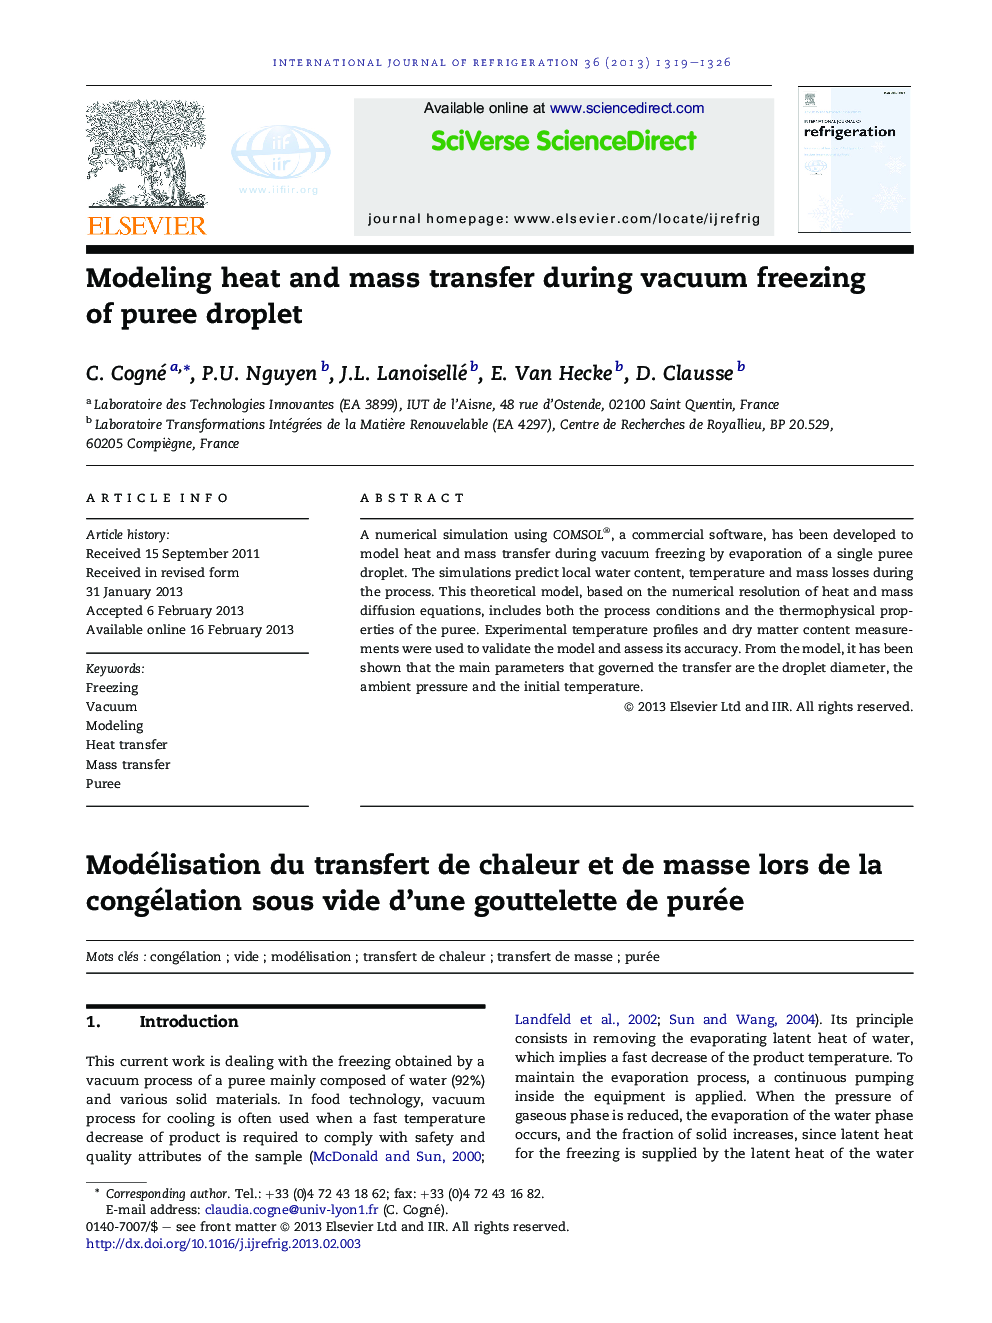 Modeling heat and mass transfer during vacuum freezing of puree droplet